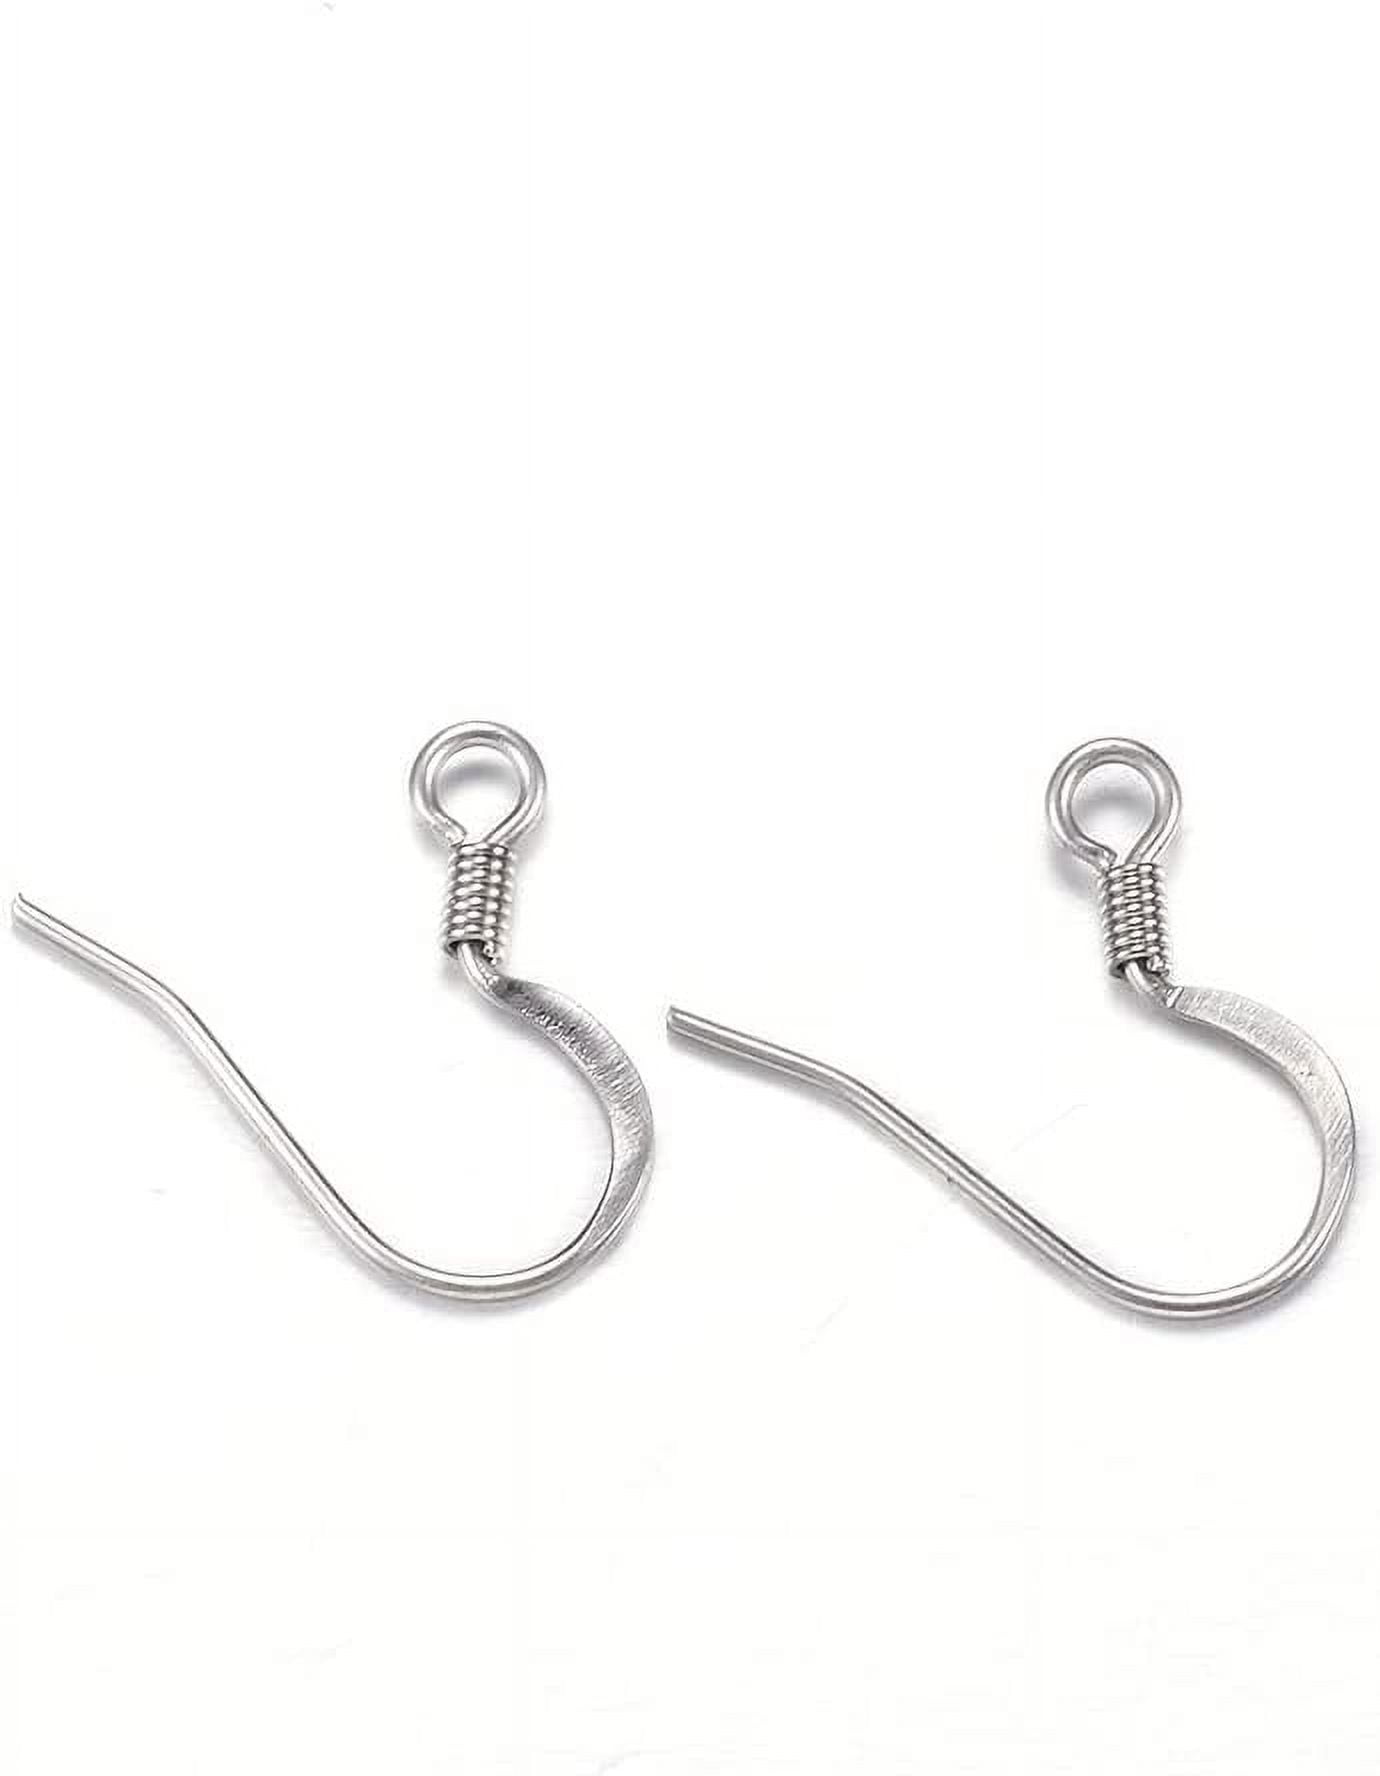 200pcs(100pairs) 0.8mm Pin Stainless Steel Earring Hooks Fish Ear